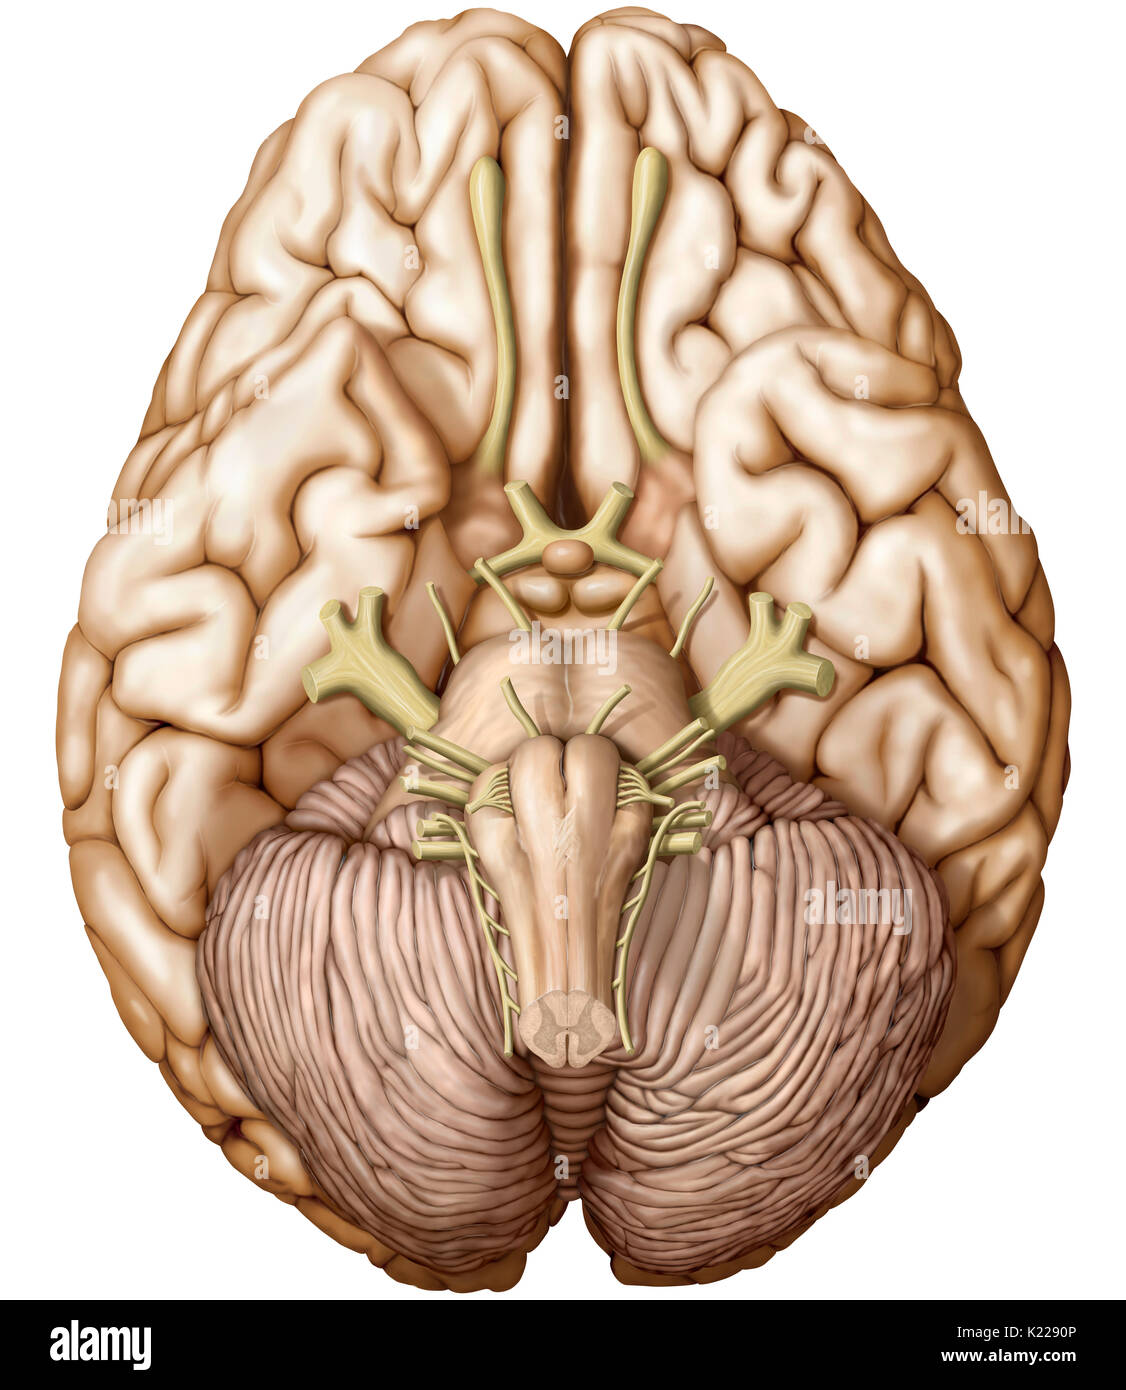 Part of the central nervous system enclosed in the skull, consisting of the cerebrum, cerebellum and brain stem; it is responsible for sensory perception, most movements, memory, language, reflexes and vital functions. Stock Photo